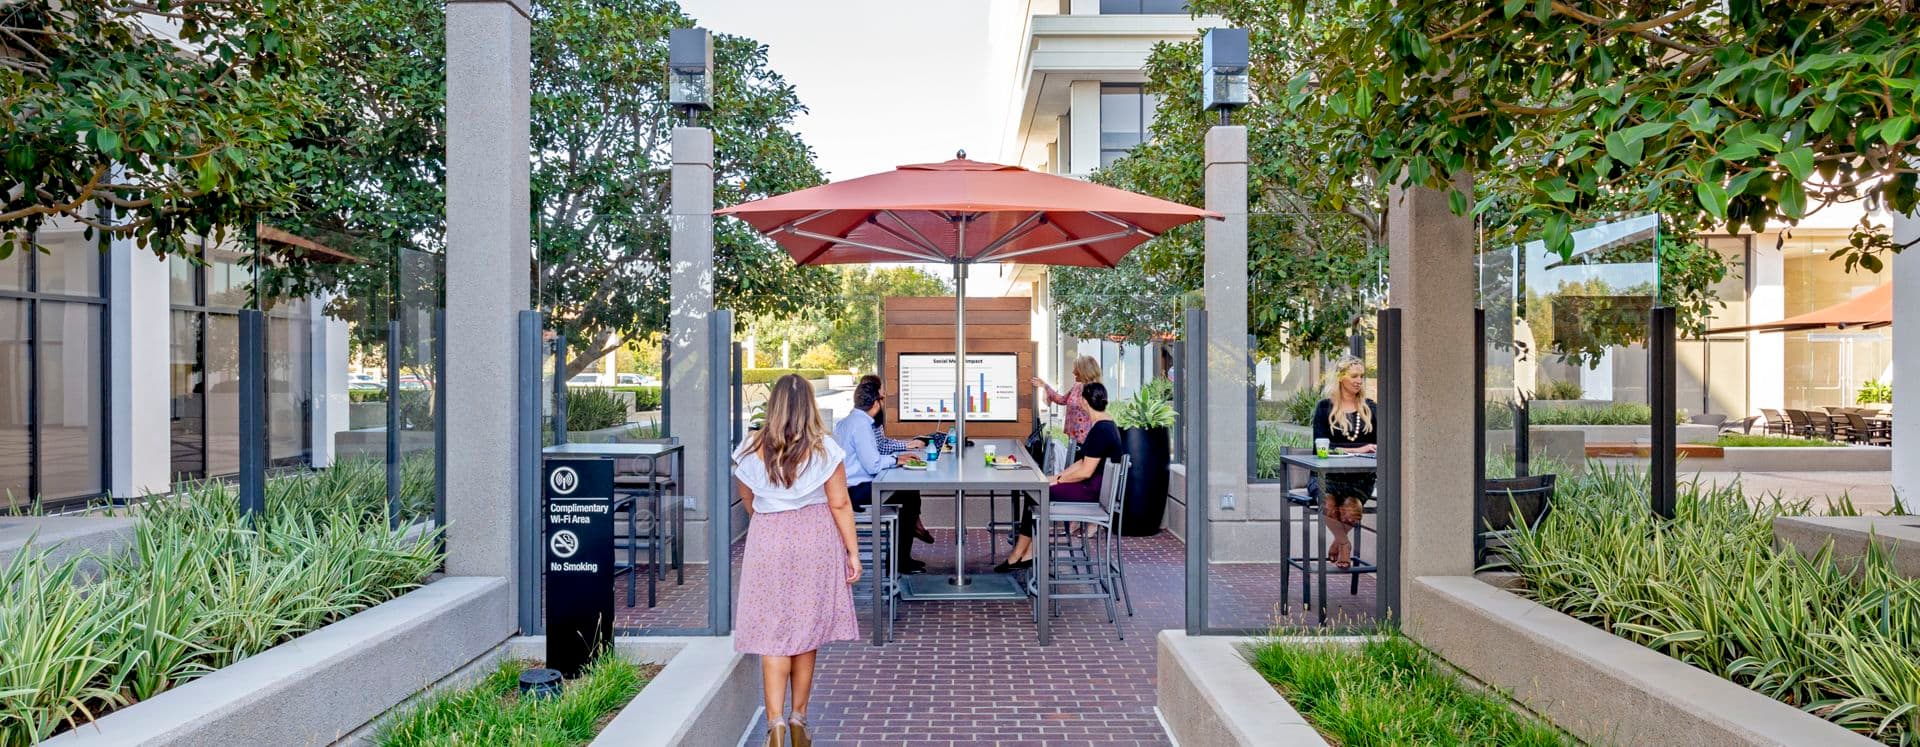 Lifestyle photography of The Commons at 800 Newport Center Drive - Pacific Financial Plaza in Newport Beach, CA